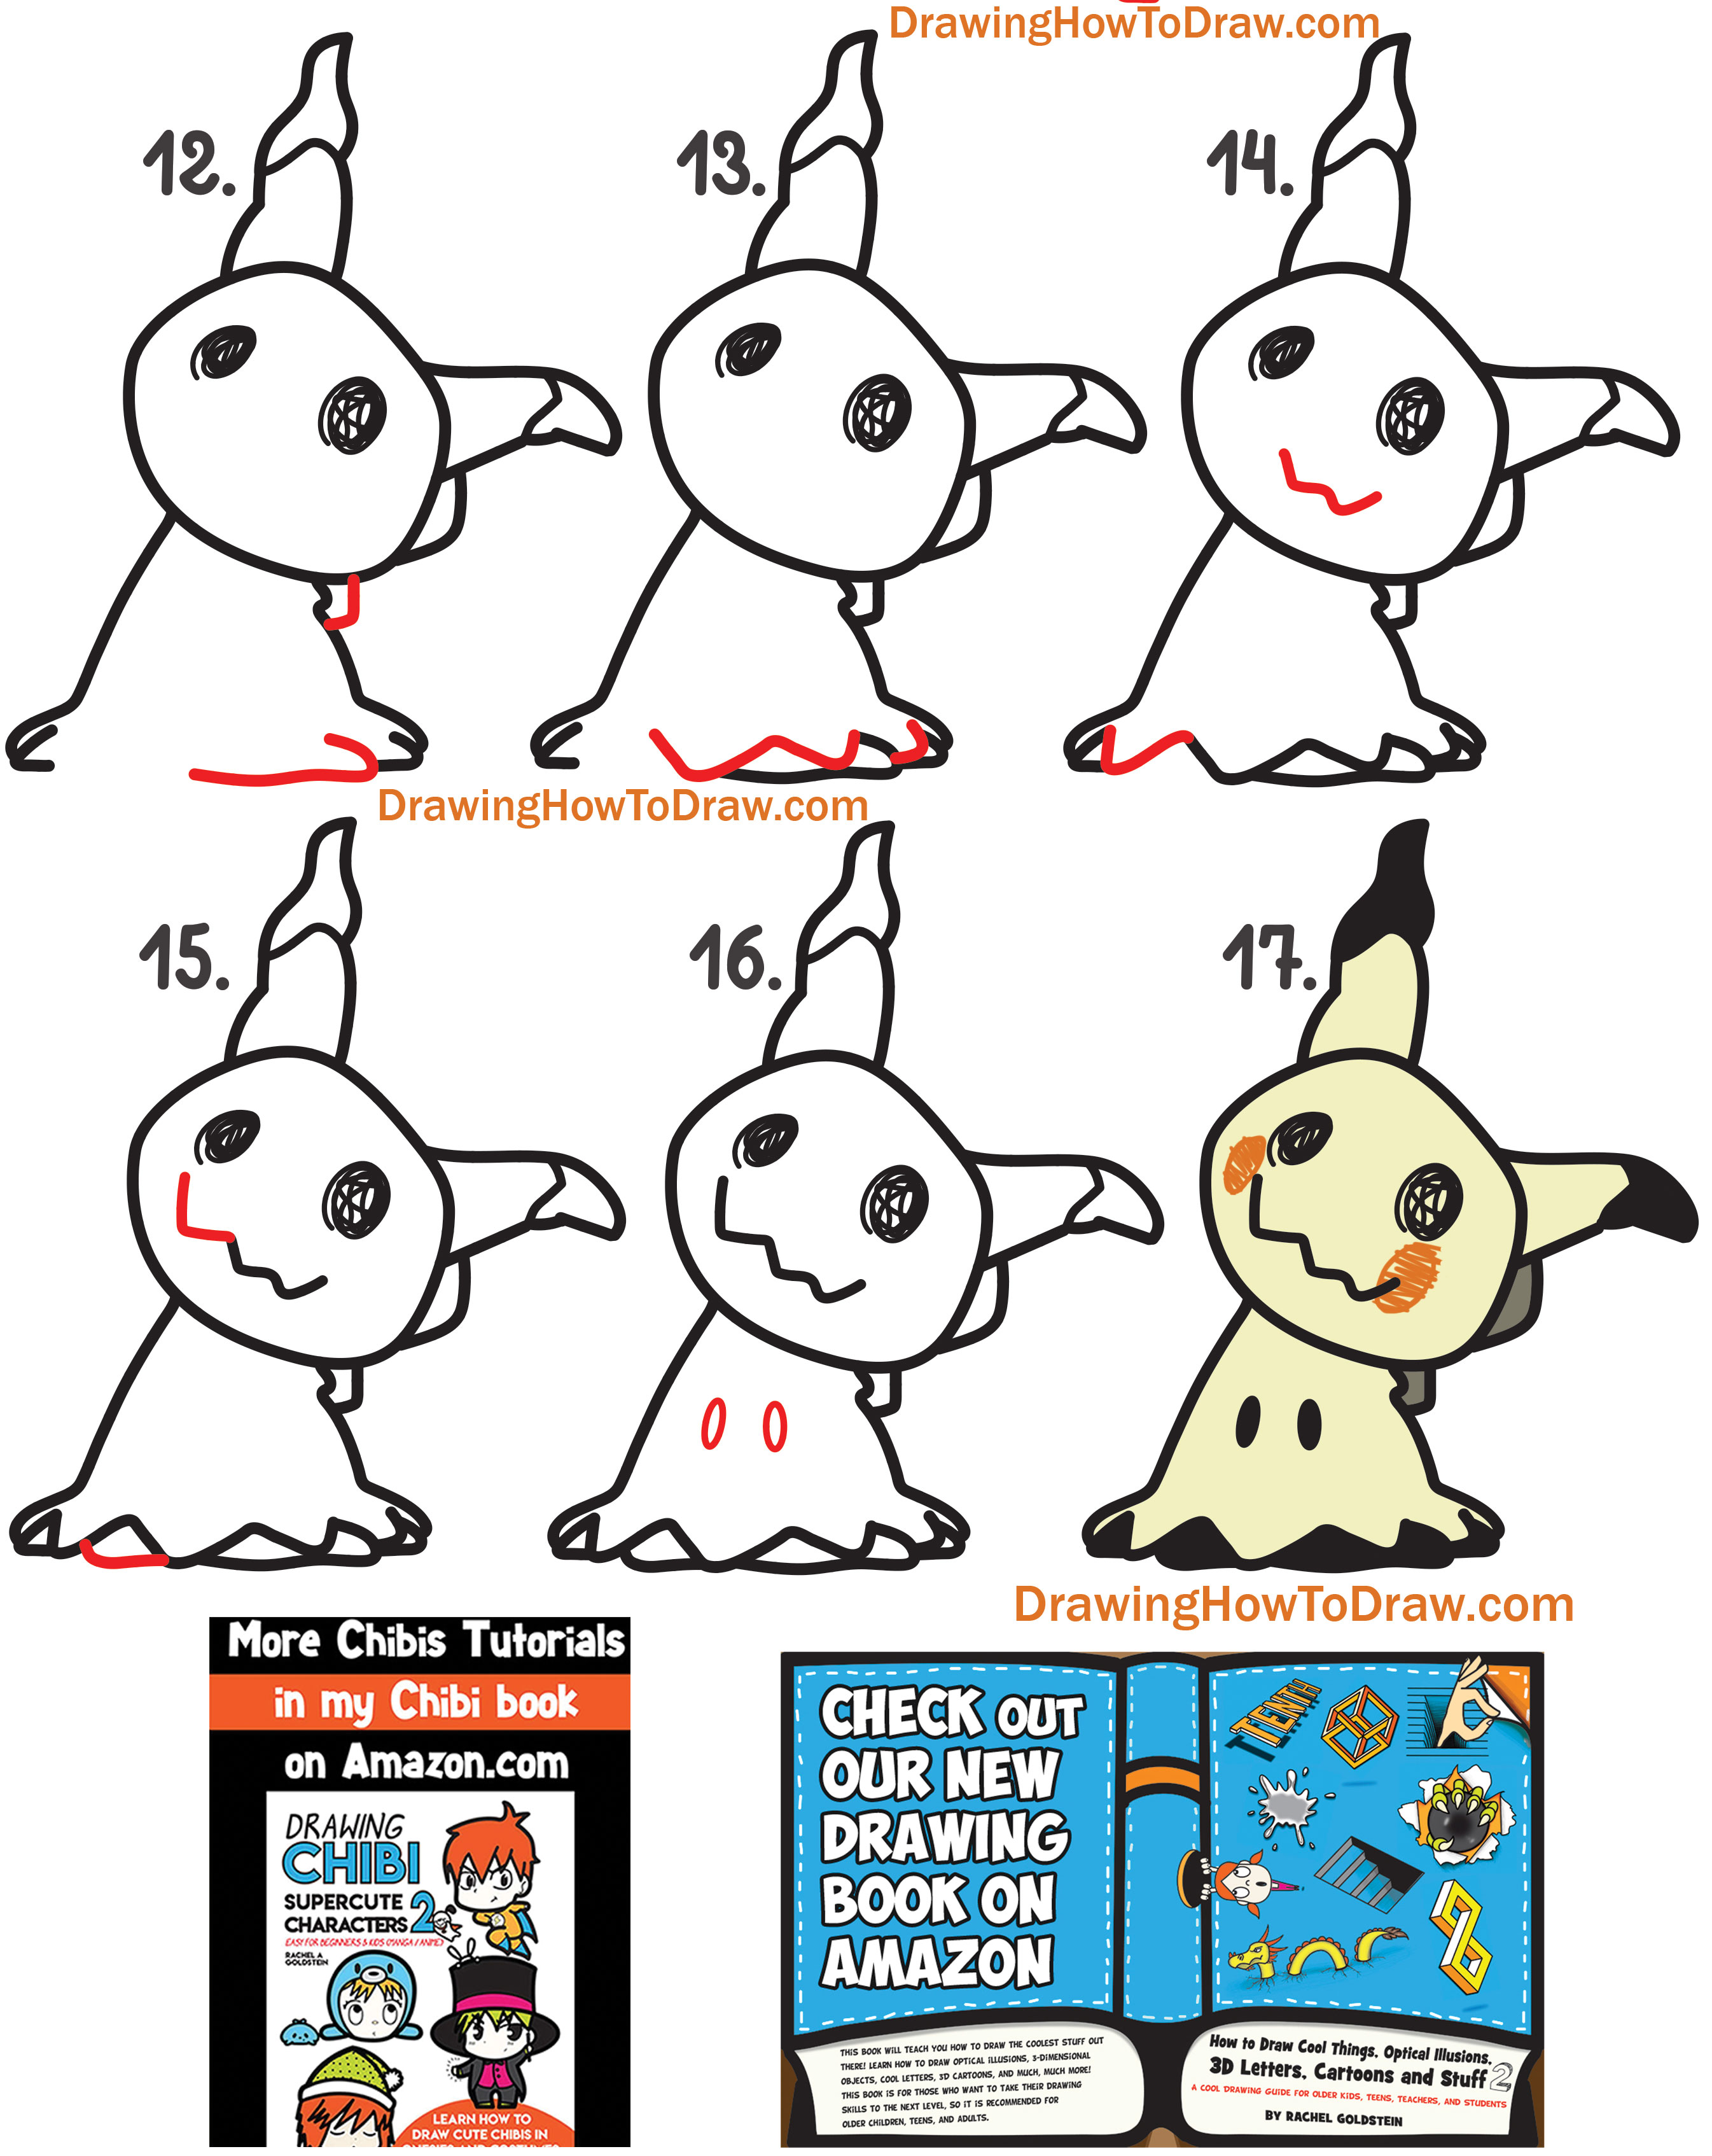 Best How To Draw Mimikyu of all time The ultimate guide 